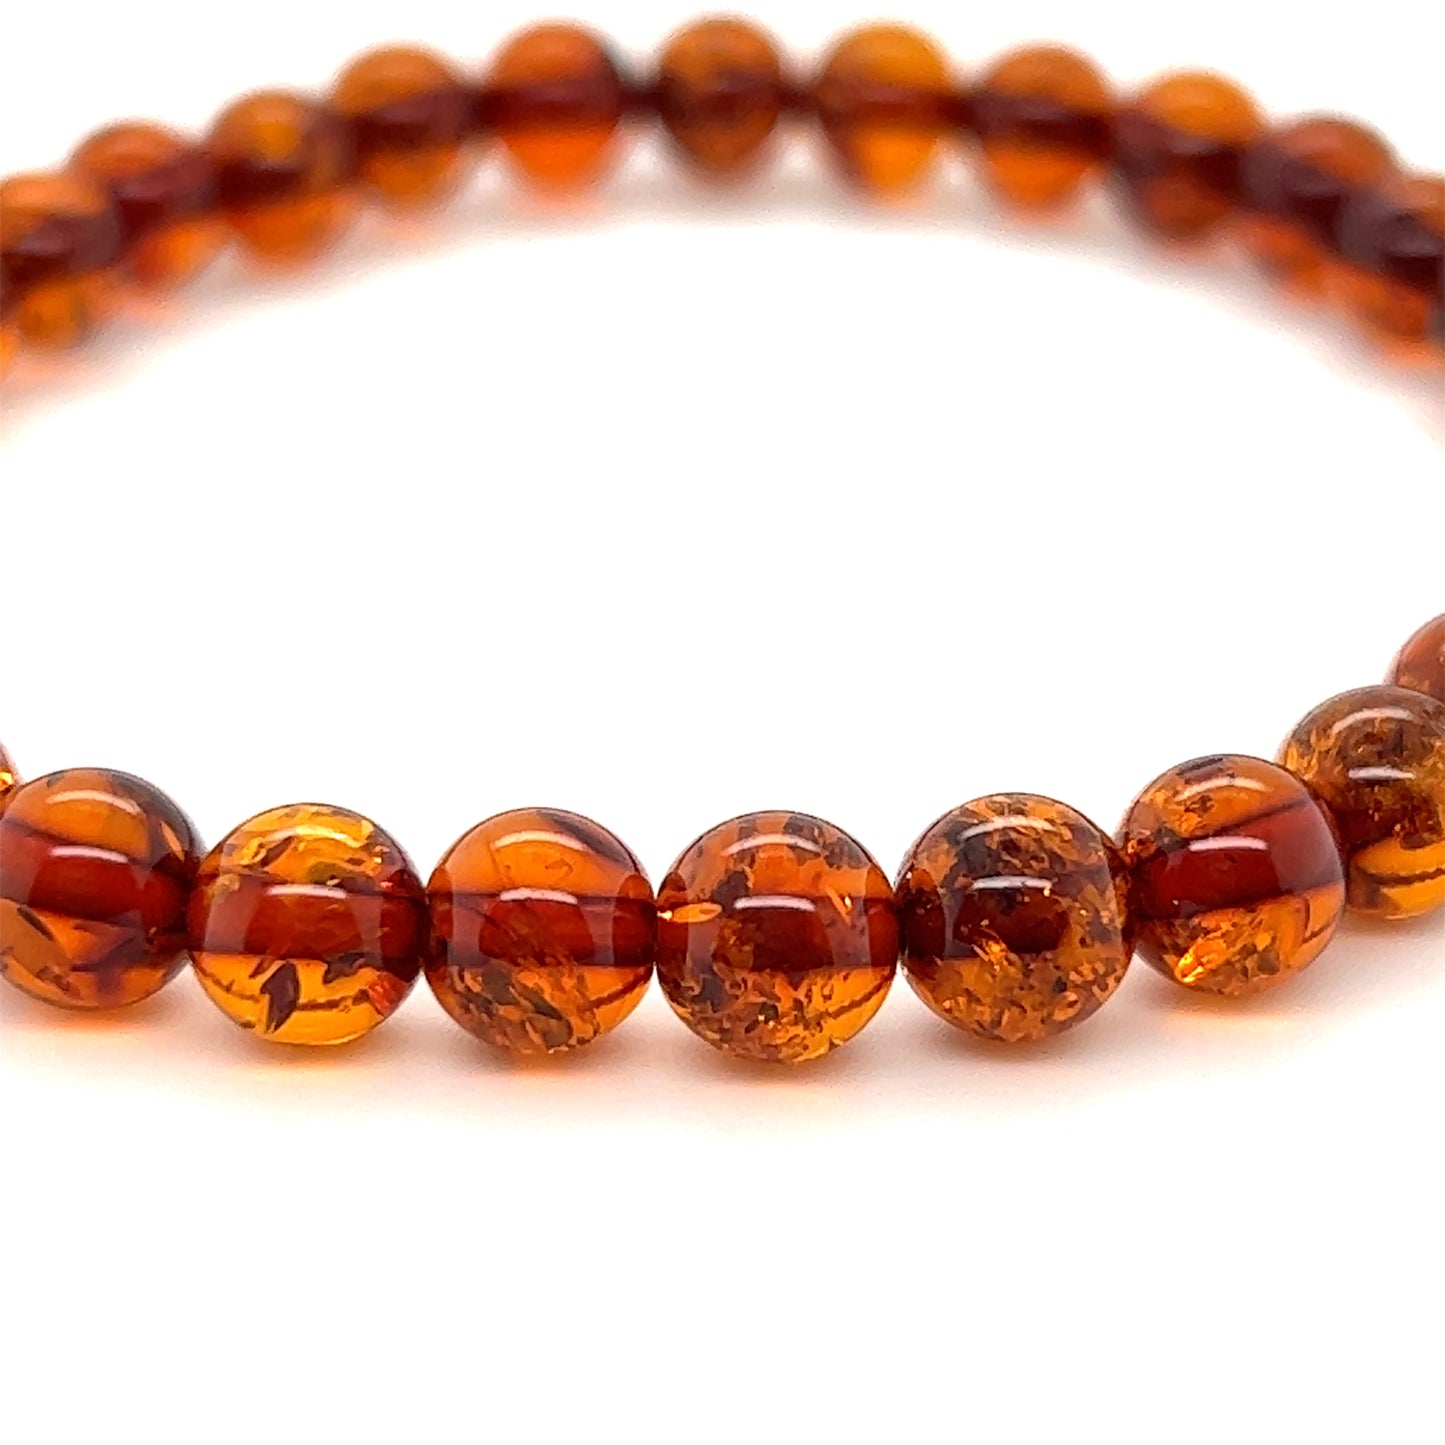 Boho-Chic Amber Bead Bracelet from Super Silver, perfect for adding a touch of elegance to any outfit. Handcrafted with genuine Baltic amber beads, this bracelet is not only stylish but also believed to possess healing properties.